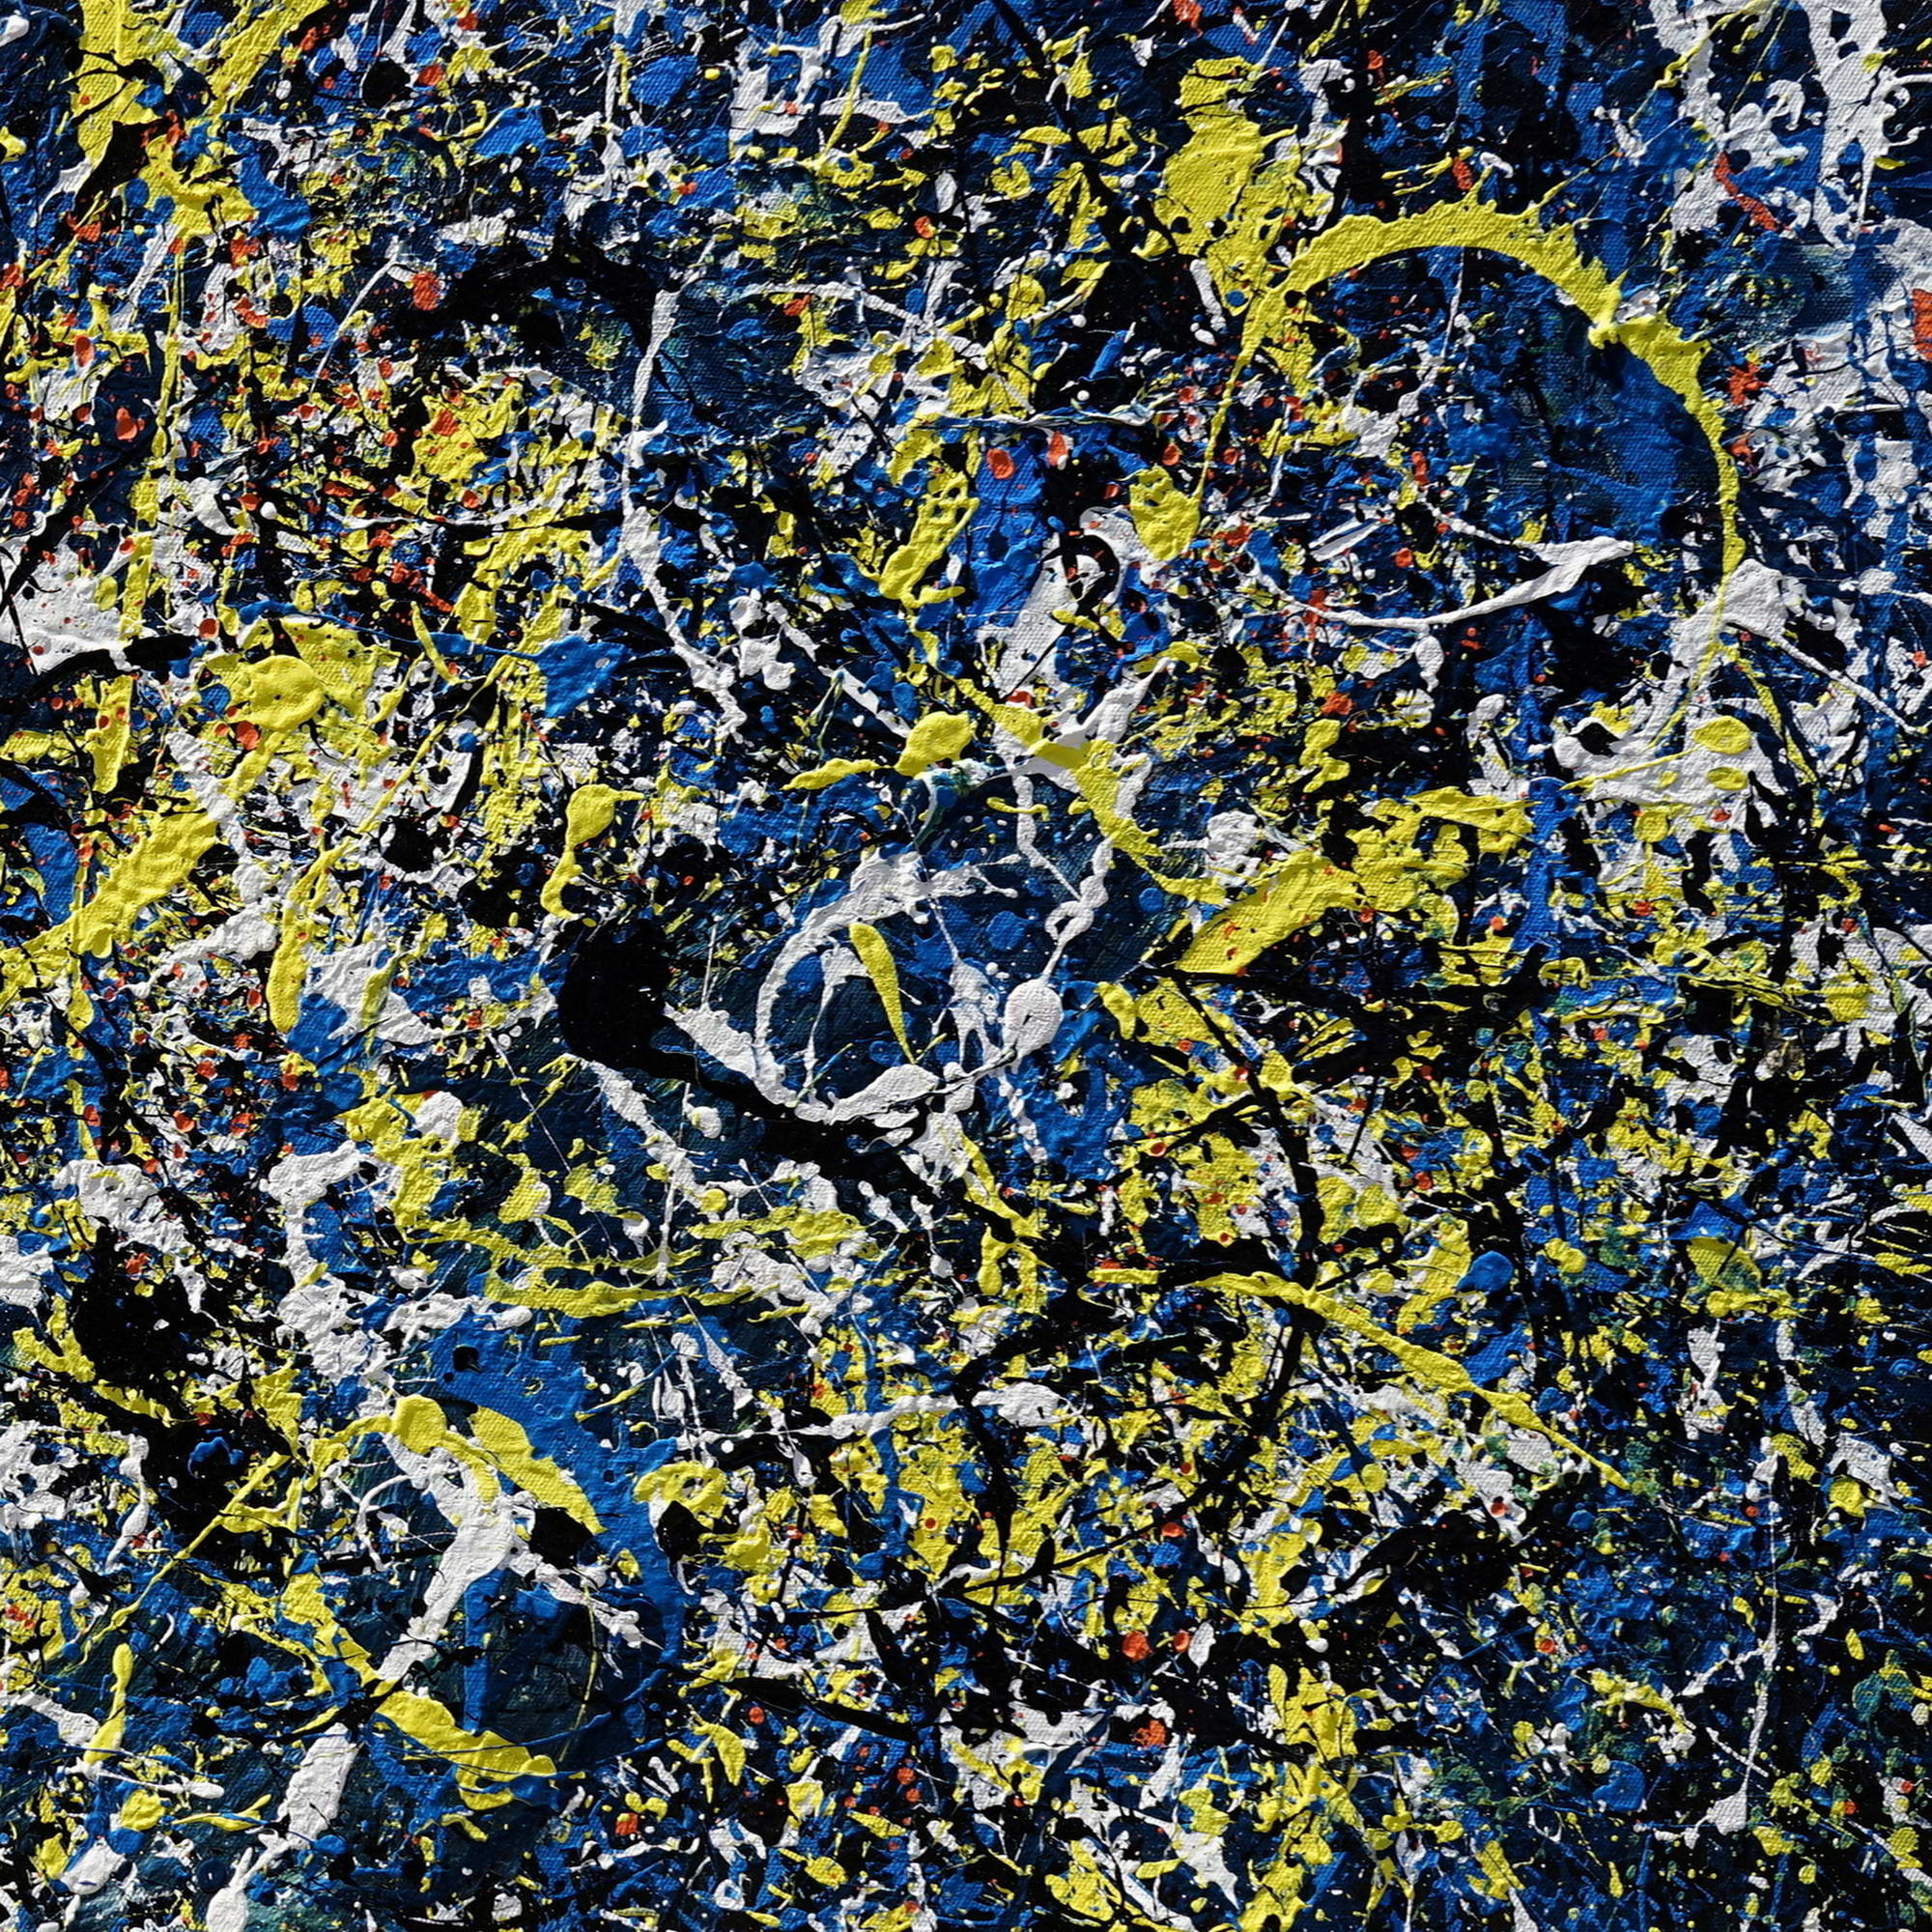 Hand painted Abstract Yellow and Blue Pollock style 75x150cm